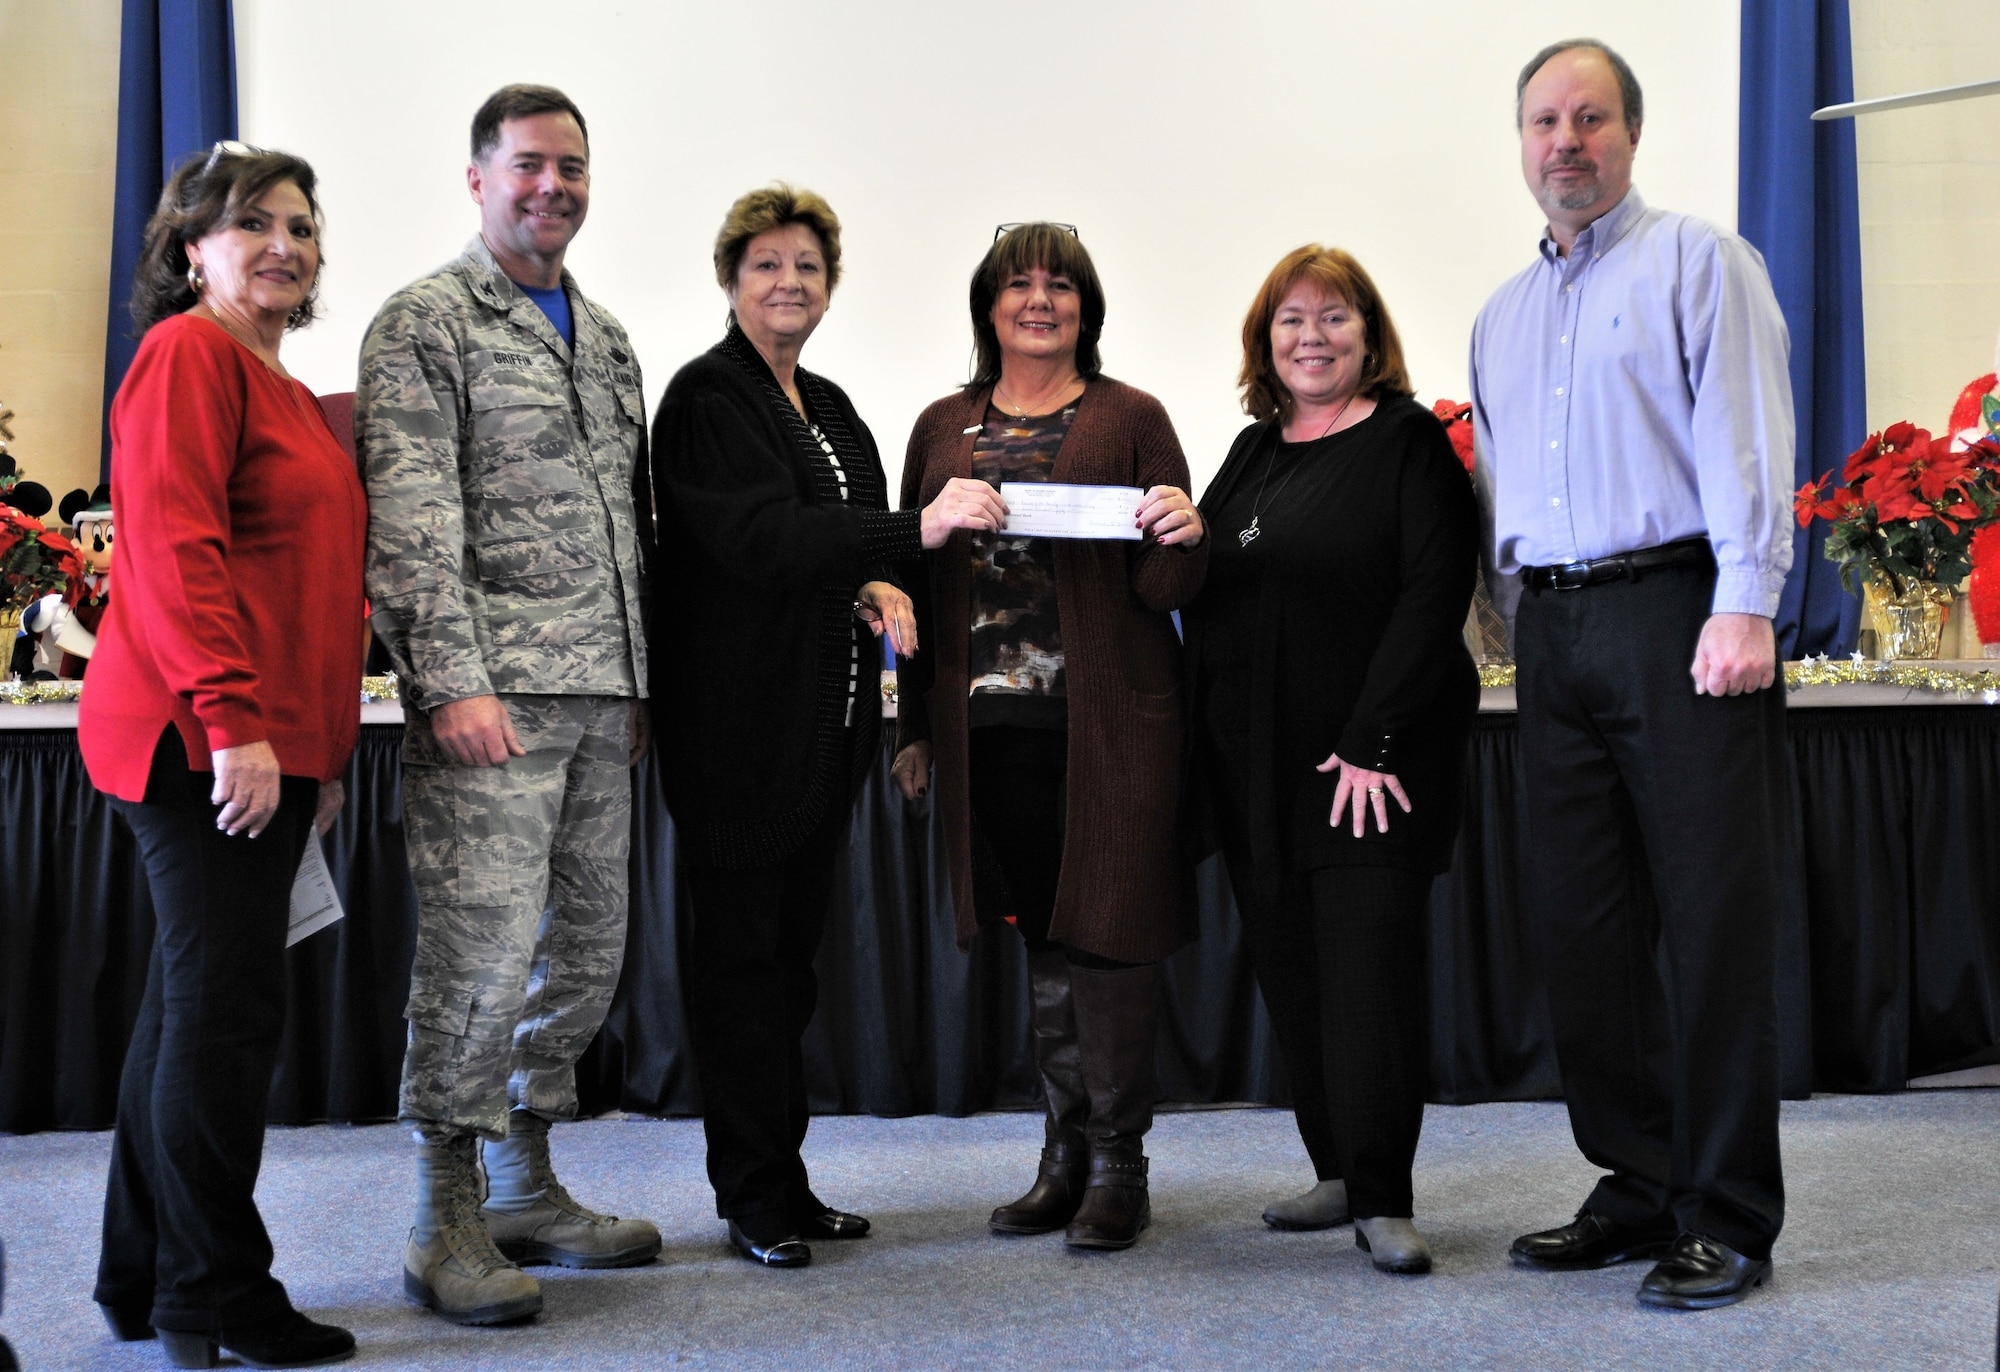 Debbie Moritz, National Alliance of Mental Illness - Bucks County chapter executive director, hands a check to retired Chief Master Sgt. Jenny Pappas, Horsham Air Guard Station Friends of the Family Readiness Group president, Dec. 2, 2017 at Horsham AGS, Pa. The gift was reciprocation for the 111th Attack Wing’s participation in the first March for the 22, an event intended to bring awareness to the daily loss of 22 U.S. veterans to suicide. On Oct. 22, 22 men and women carrying 22-pound rucksacks marched 22 kilometers – from Washington Crossing National Cemetery, Newtown, Pa., to the Doylestown courthouse, Doylestown, Pa. The Veterans of Foreign Wars of the United States, Post 175, Doylestown, was also involved in the march and is represented in the photo by Kurt Mueller, far right. Anna Richar, 111th ATKW Airman & Family Readiness Center, stands with 111th ATKW Commander Col. William Griffin, both on left. Joanne Murray, standing next to Mortiz, is representing the March for the 22 committee. (U.S. Air National Guard photo by Tech. Sgt. Andria Allmond)